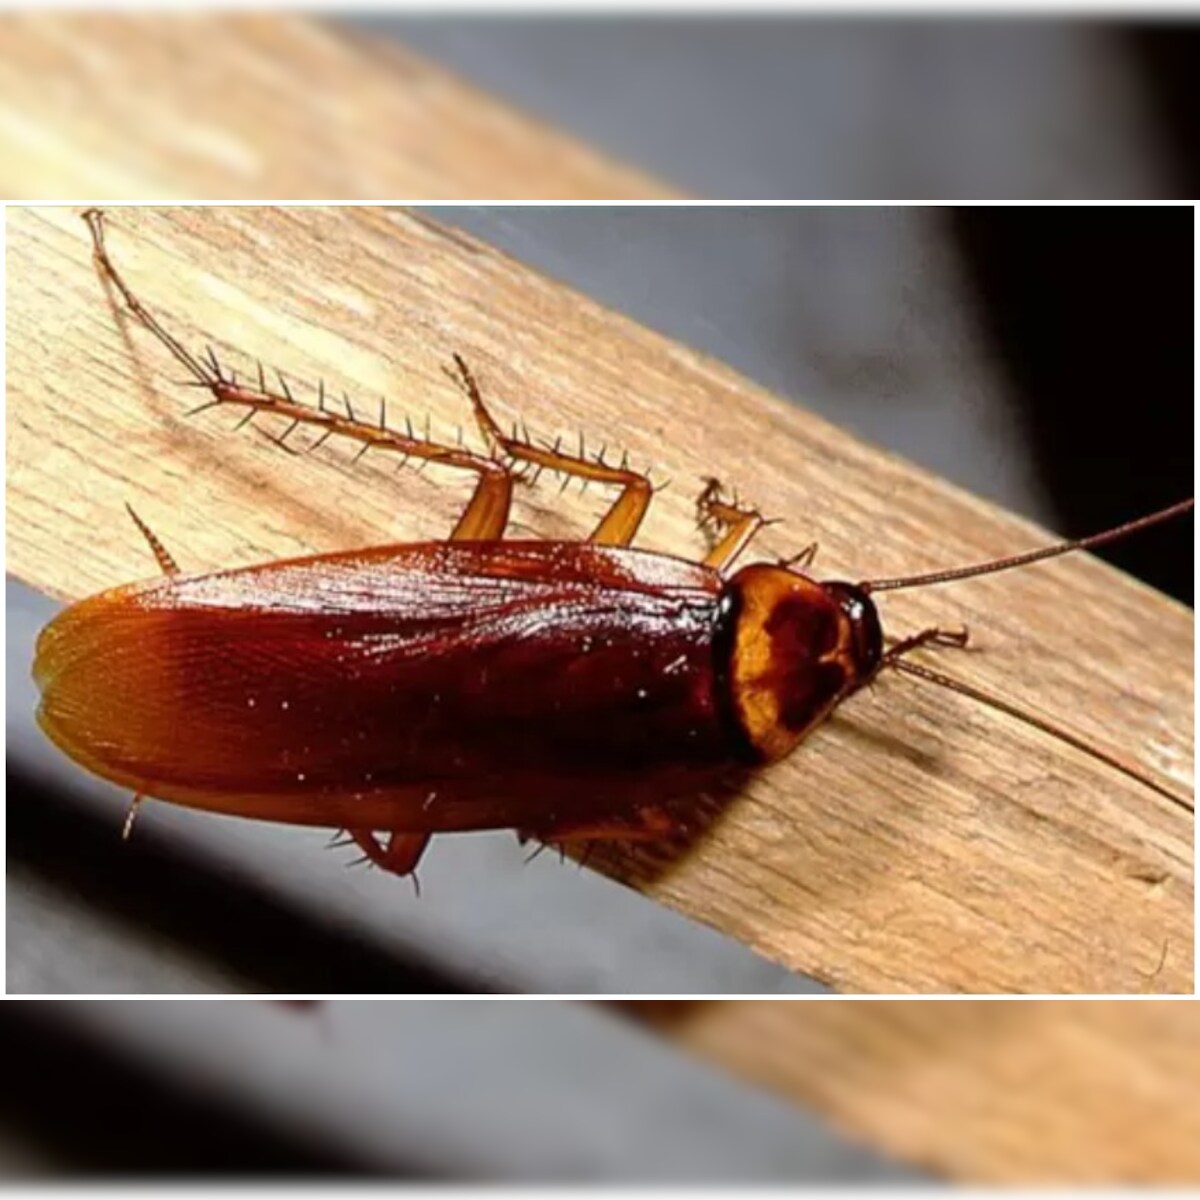 Vet Performed Surgery On Pregnant Cockroach Who Developed Complications While Giving Birth